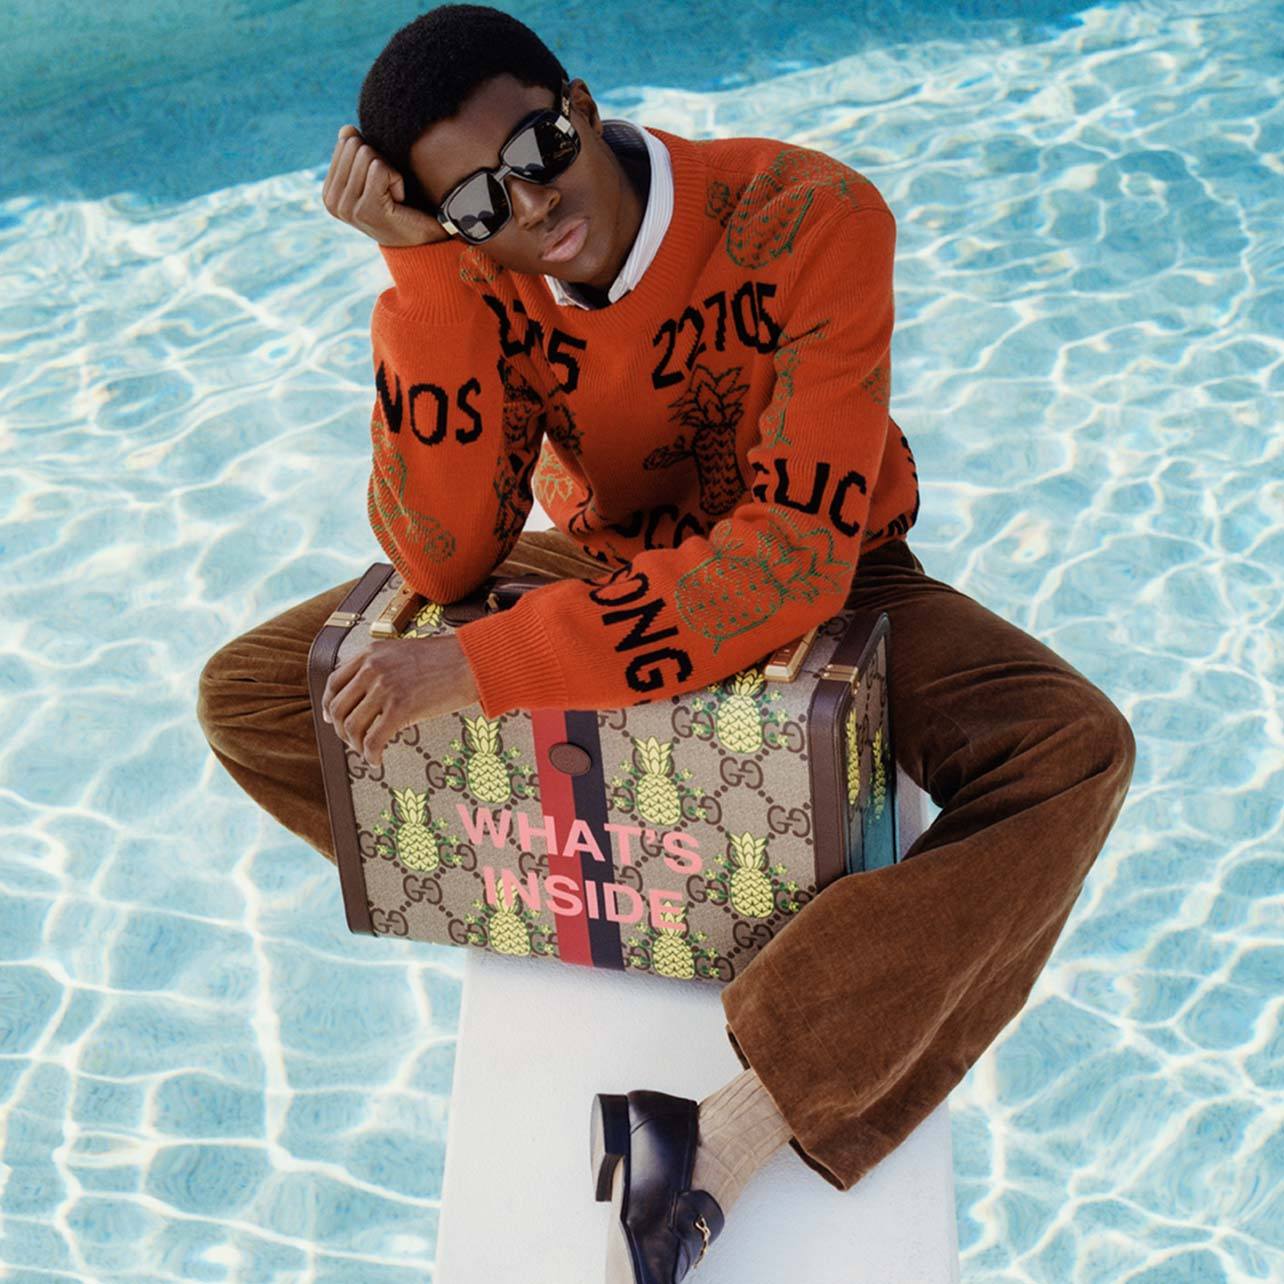 Man sitting on a diving board over a pool holding a Gucci monogrammed suitcase